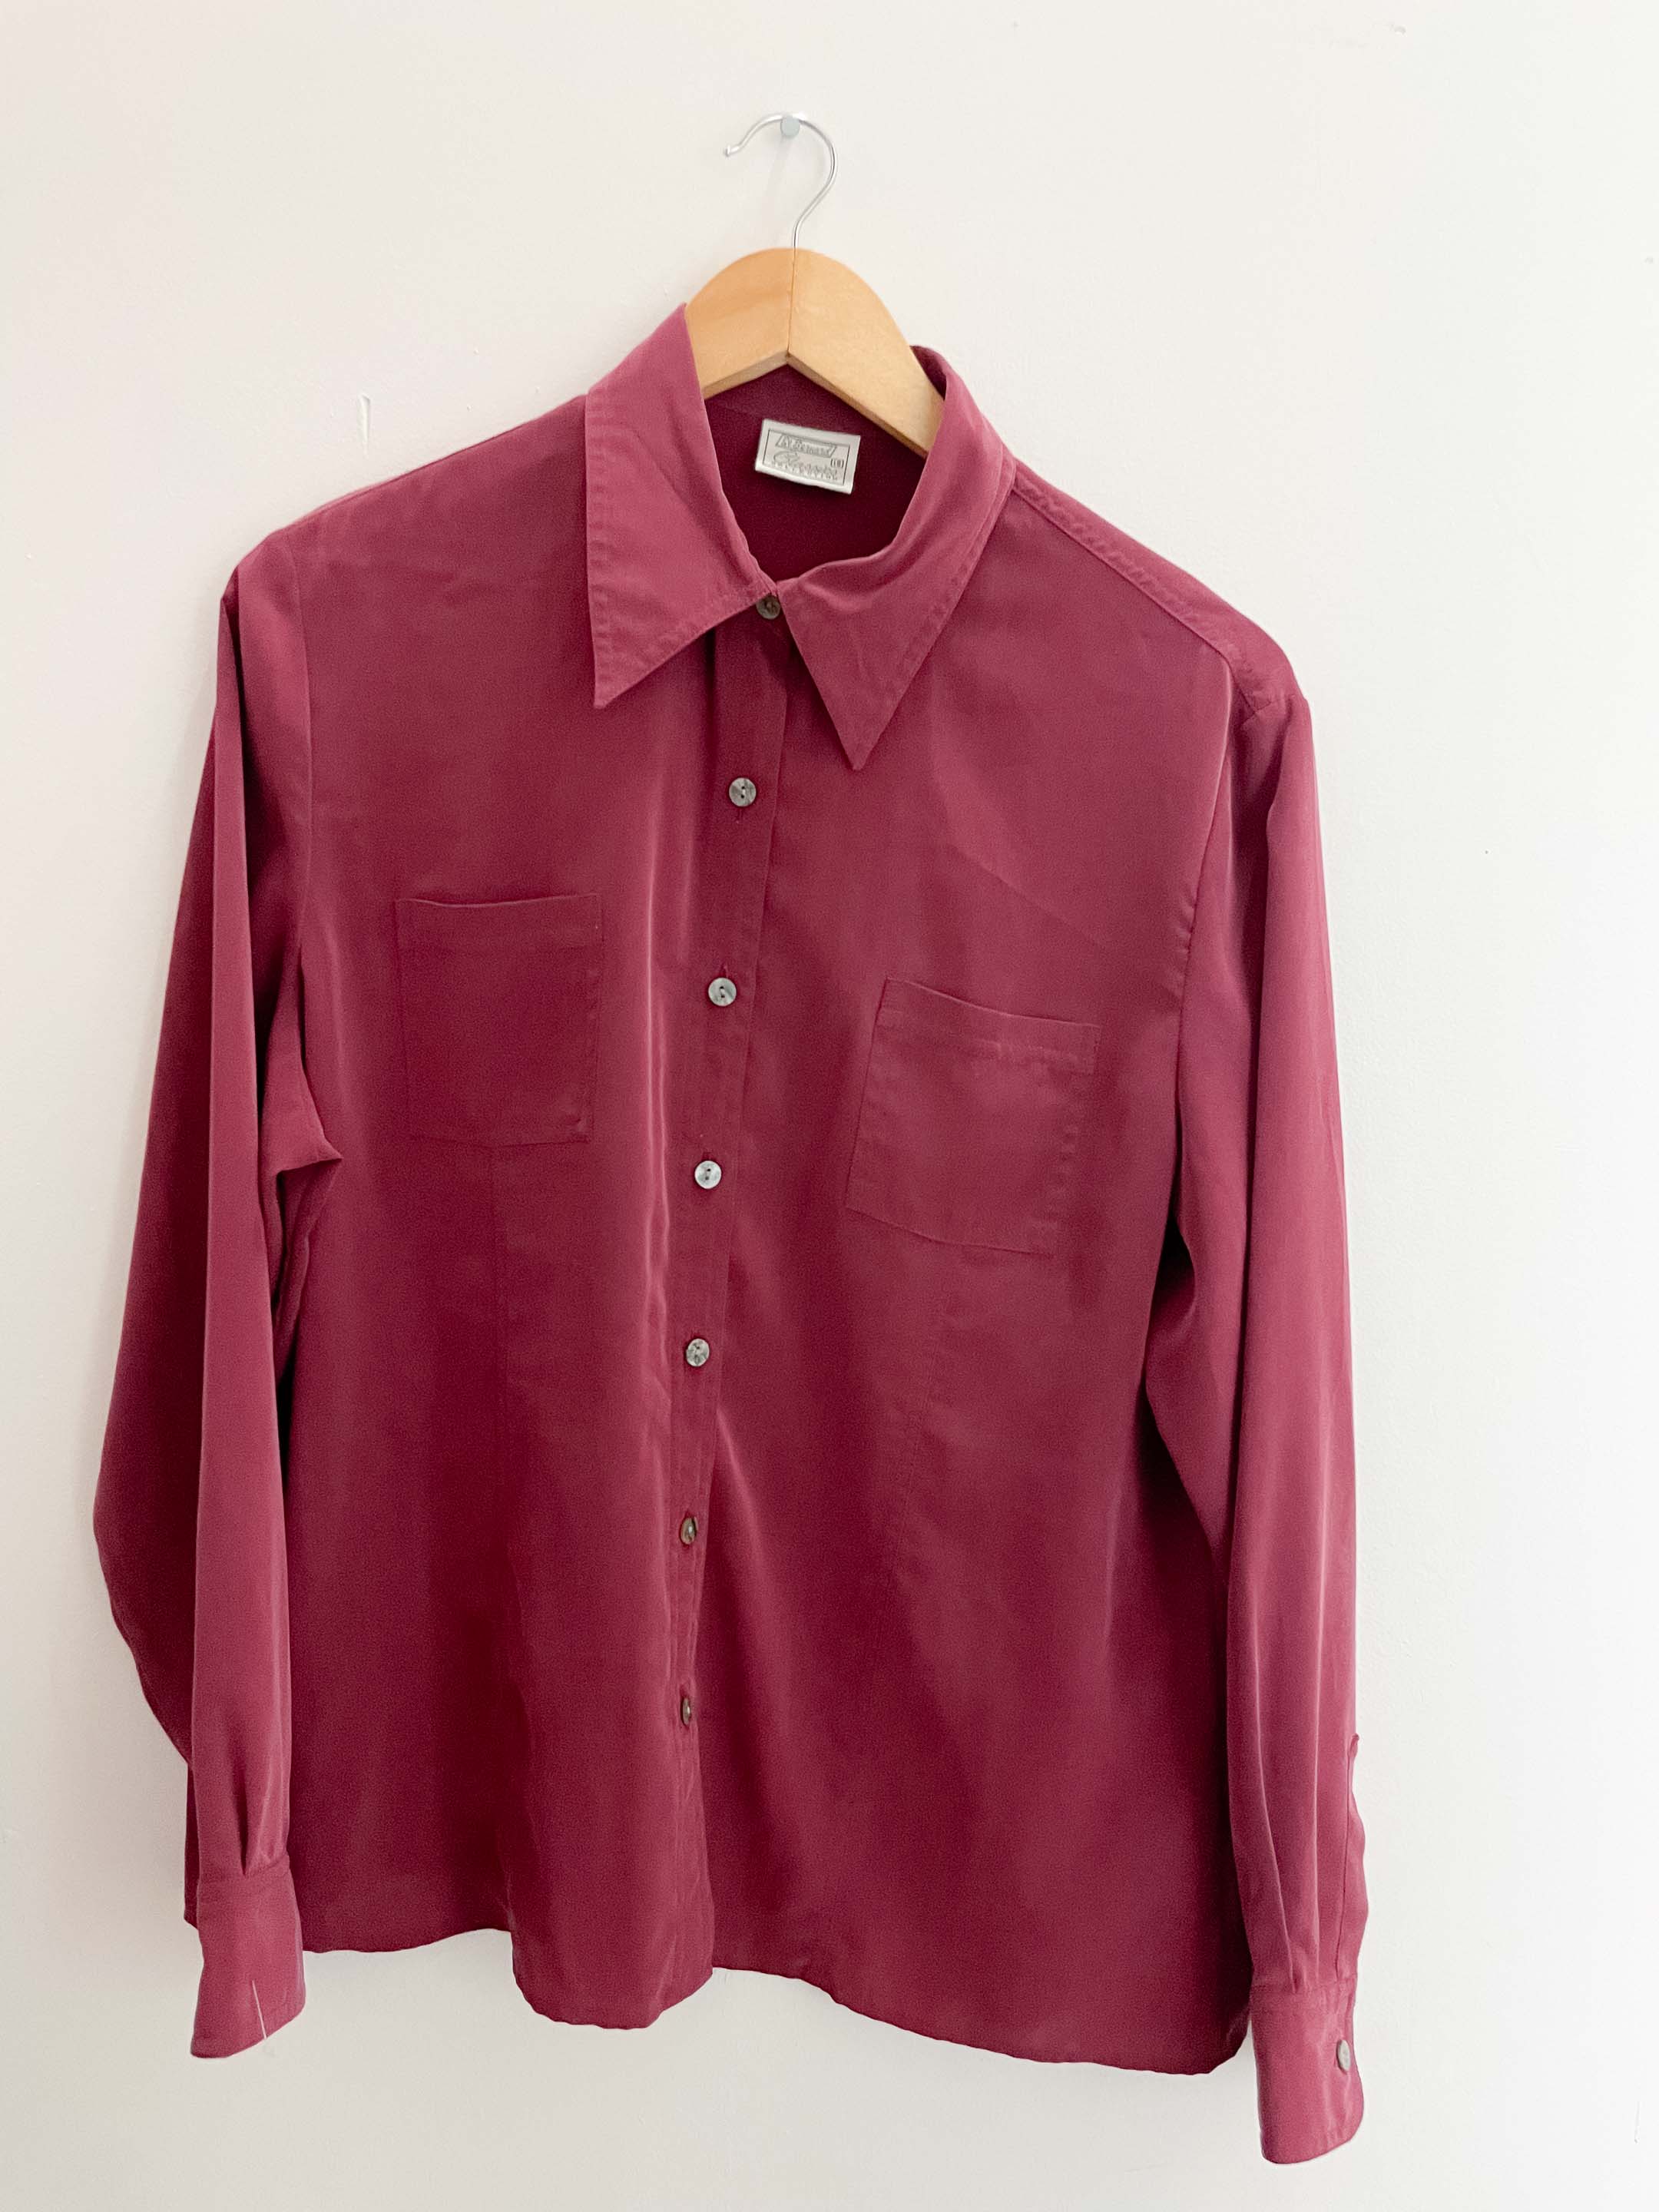 Vintage premium classic fit red long sleeve shirt size 8